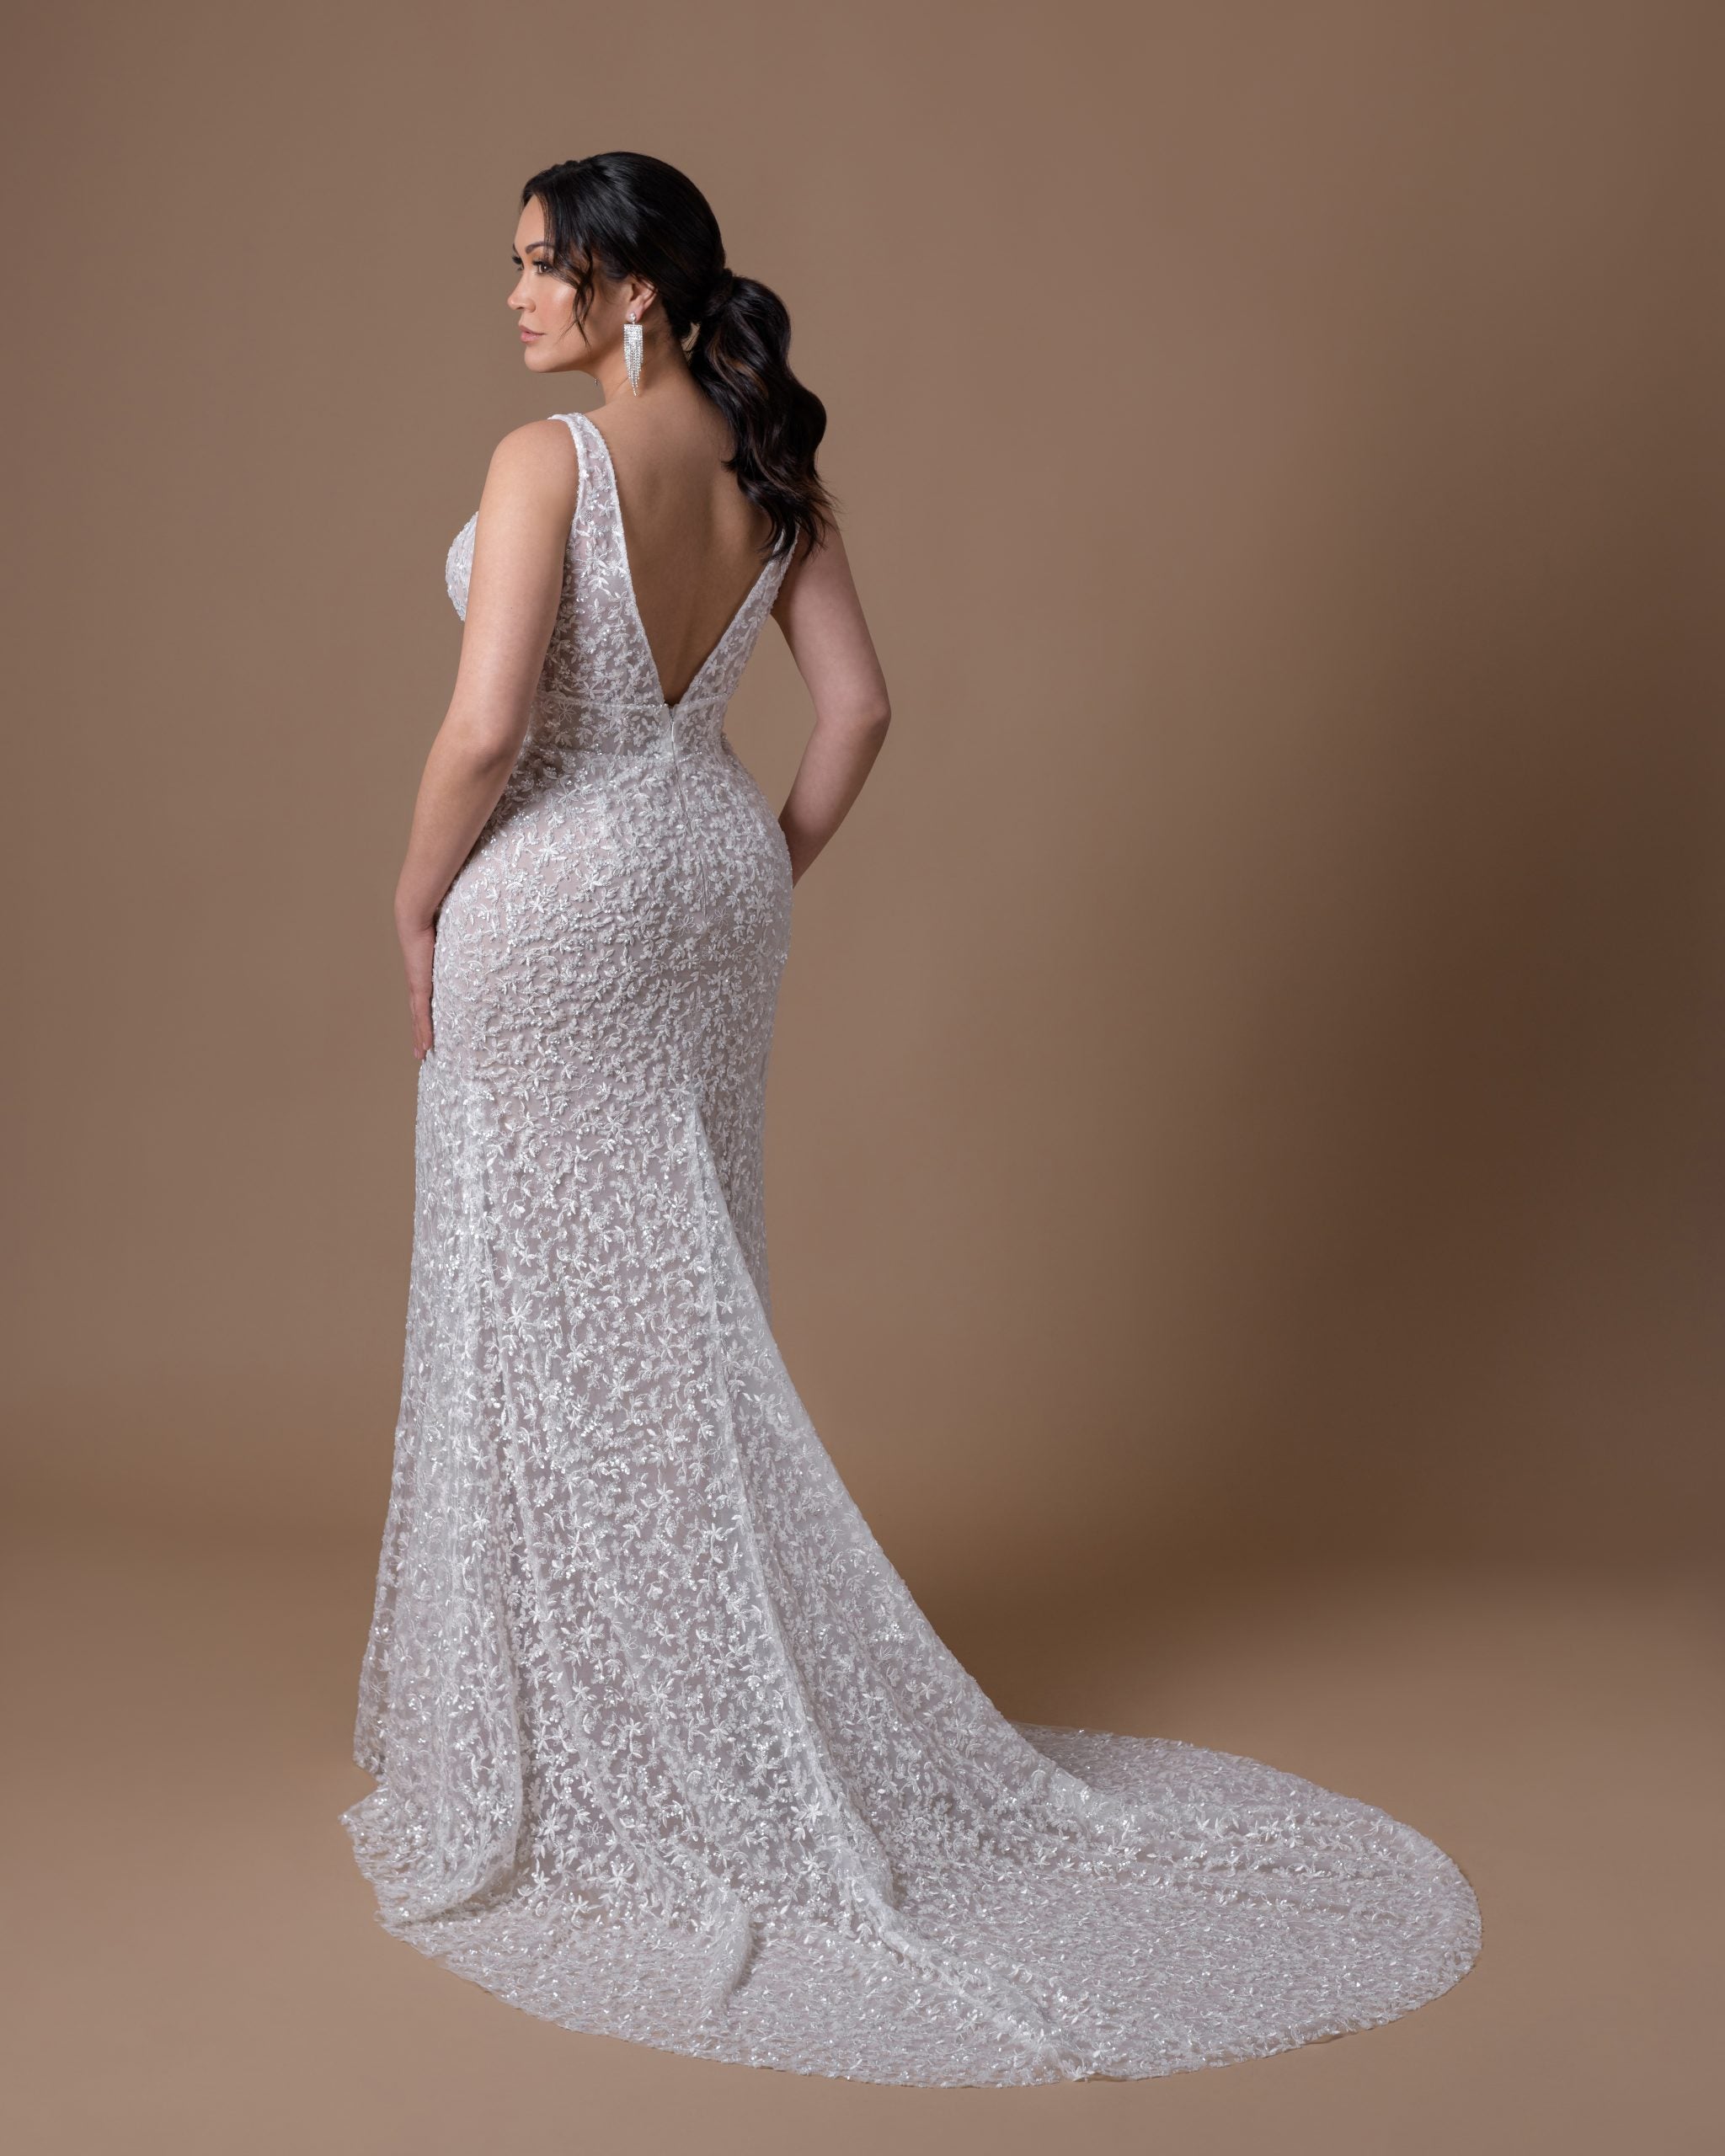 Embellished Fit-and-Flare Gown by Dany Girl - Image 2